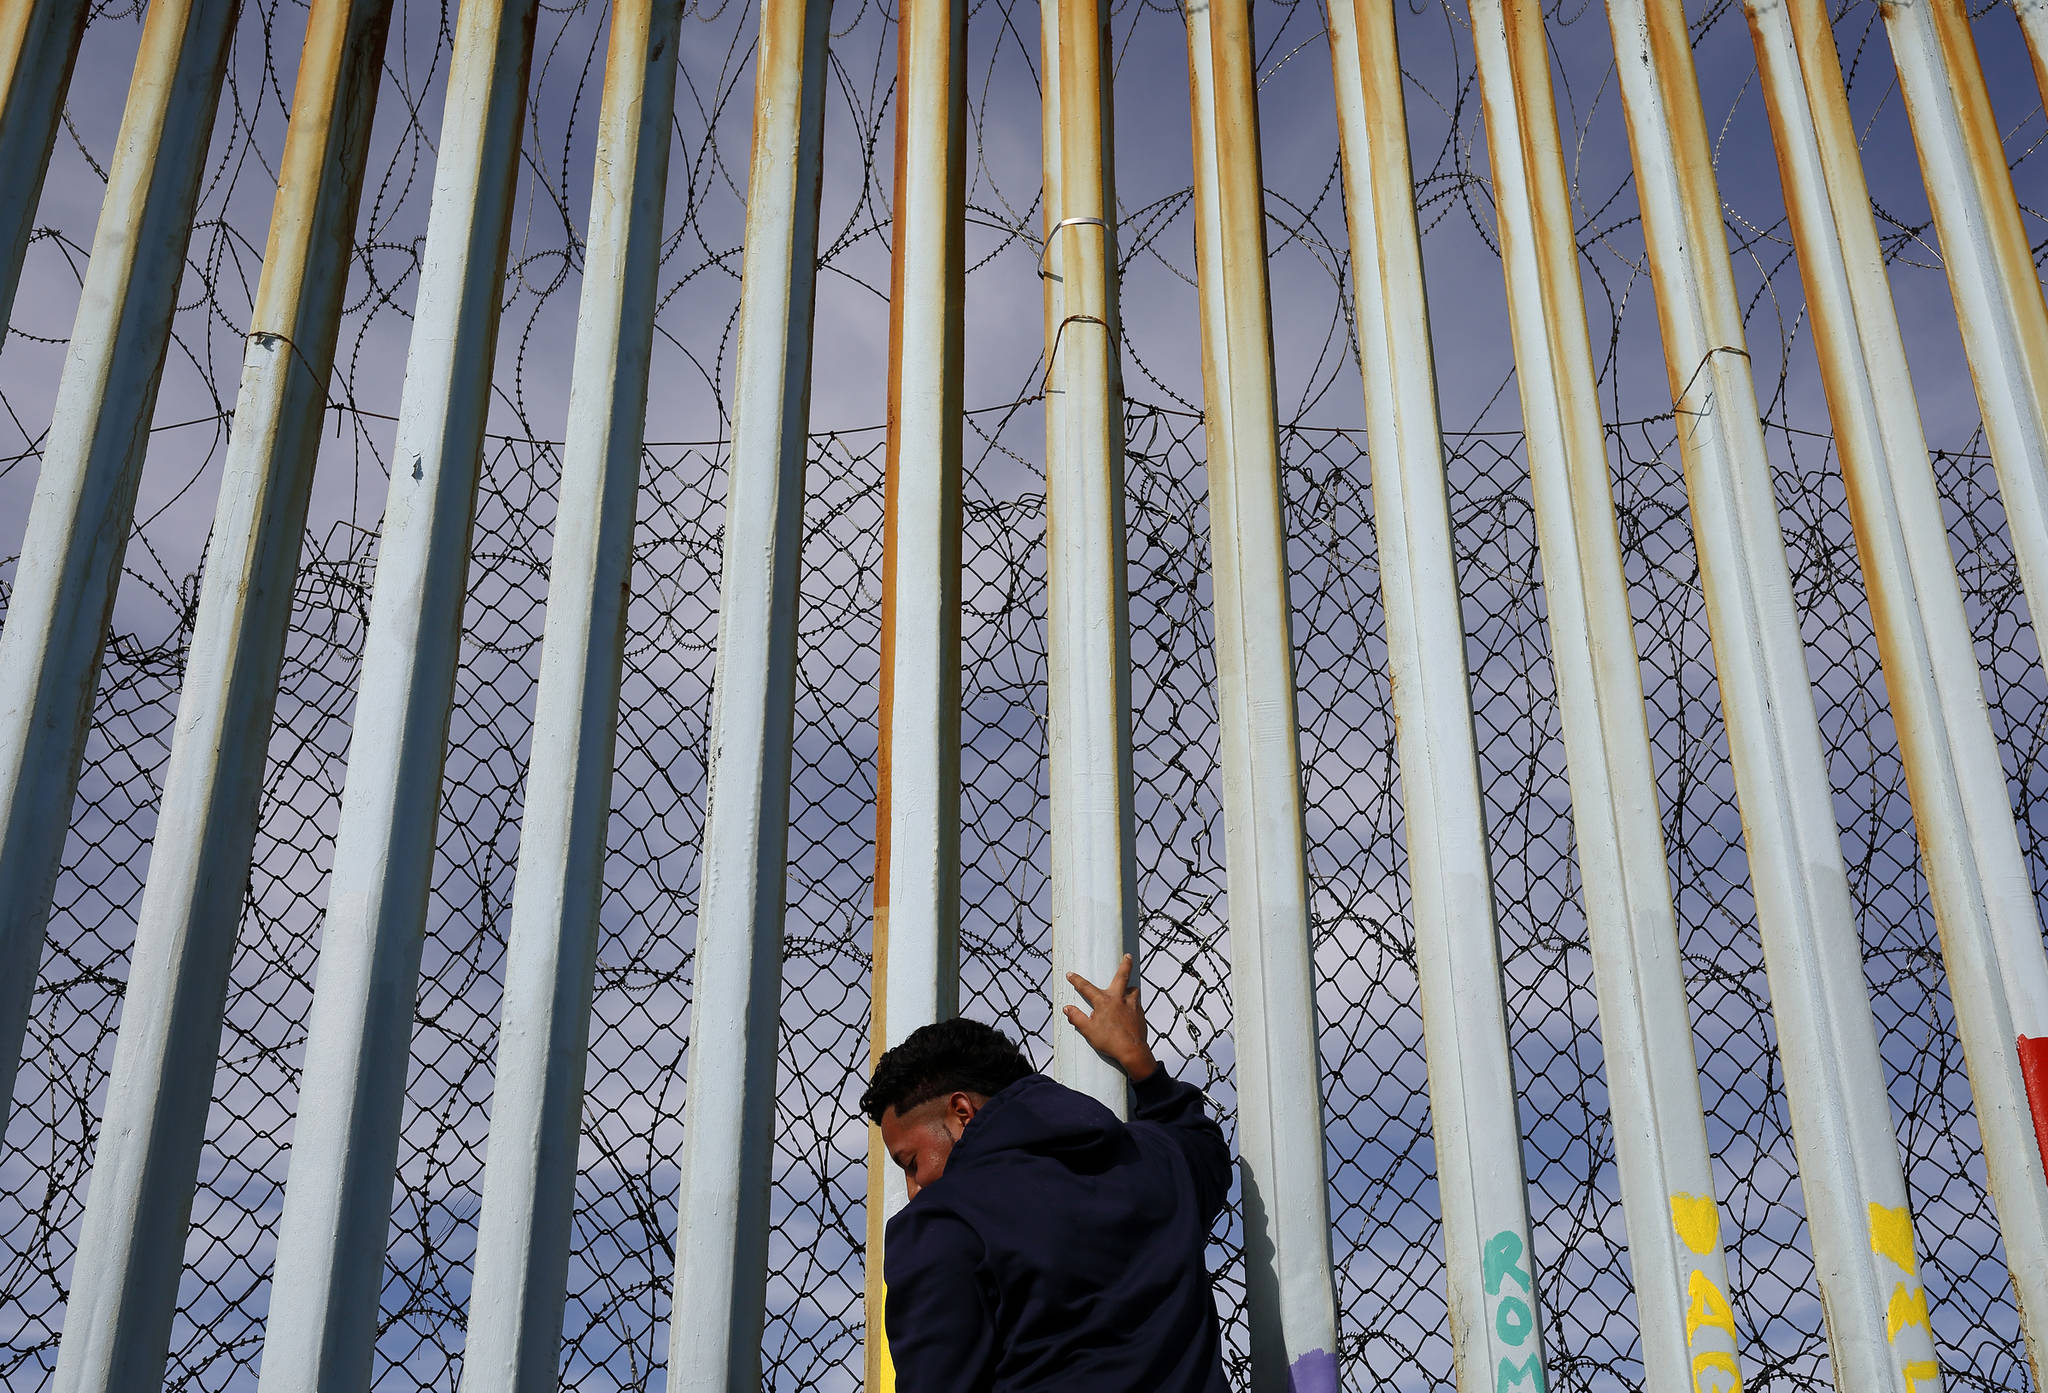 Opinion: Vote ‘no’ on the border wall